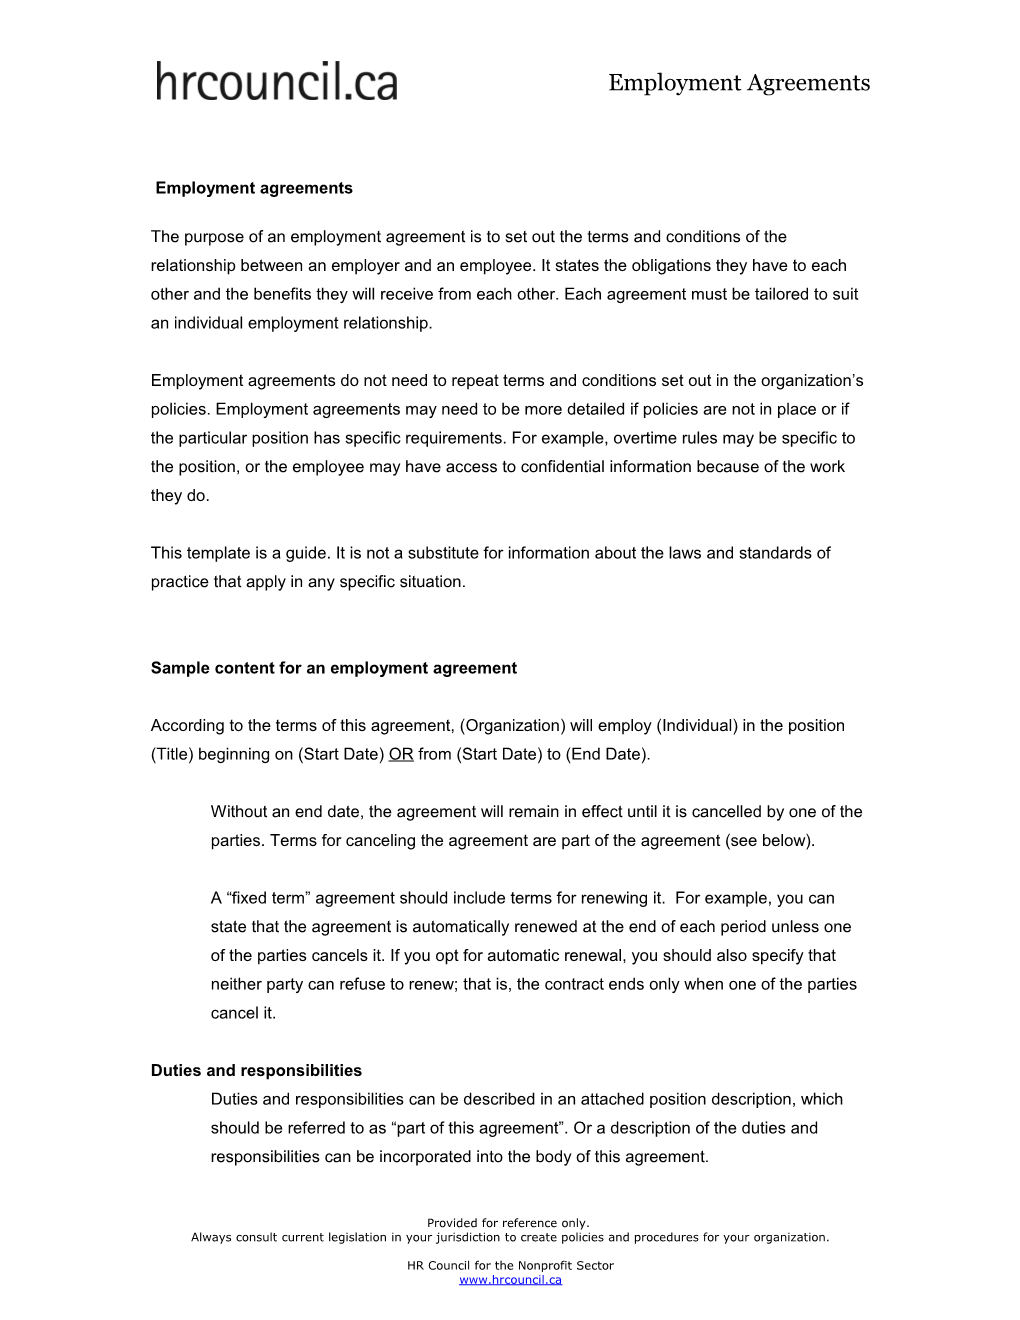 Sample Content for an Employment Agreement